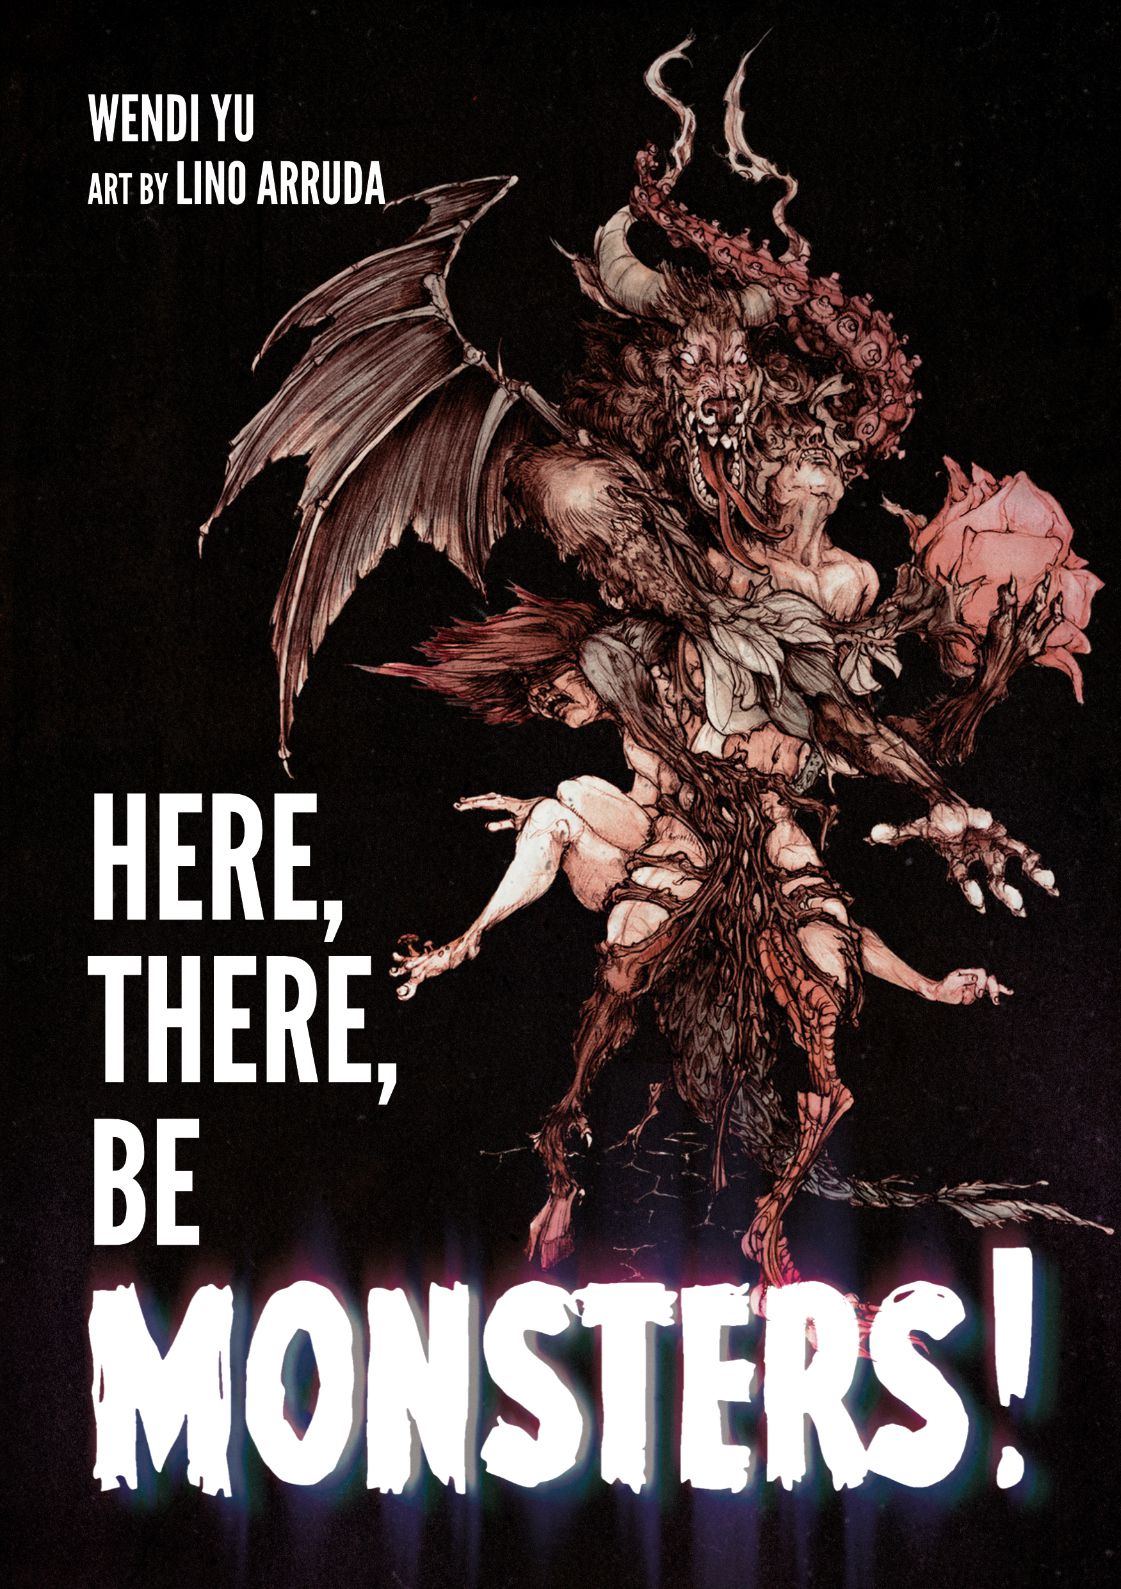 The cover of Here There Be Monsters evokes old-timey, black and white and silent horror films. A winged serpent composed of fleshy human bits stands on a black background. The white text on the page is blown out, as if the projectionist had something a bit off in the screening room.